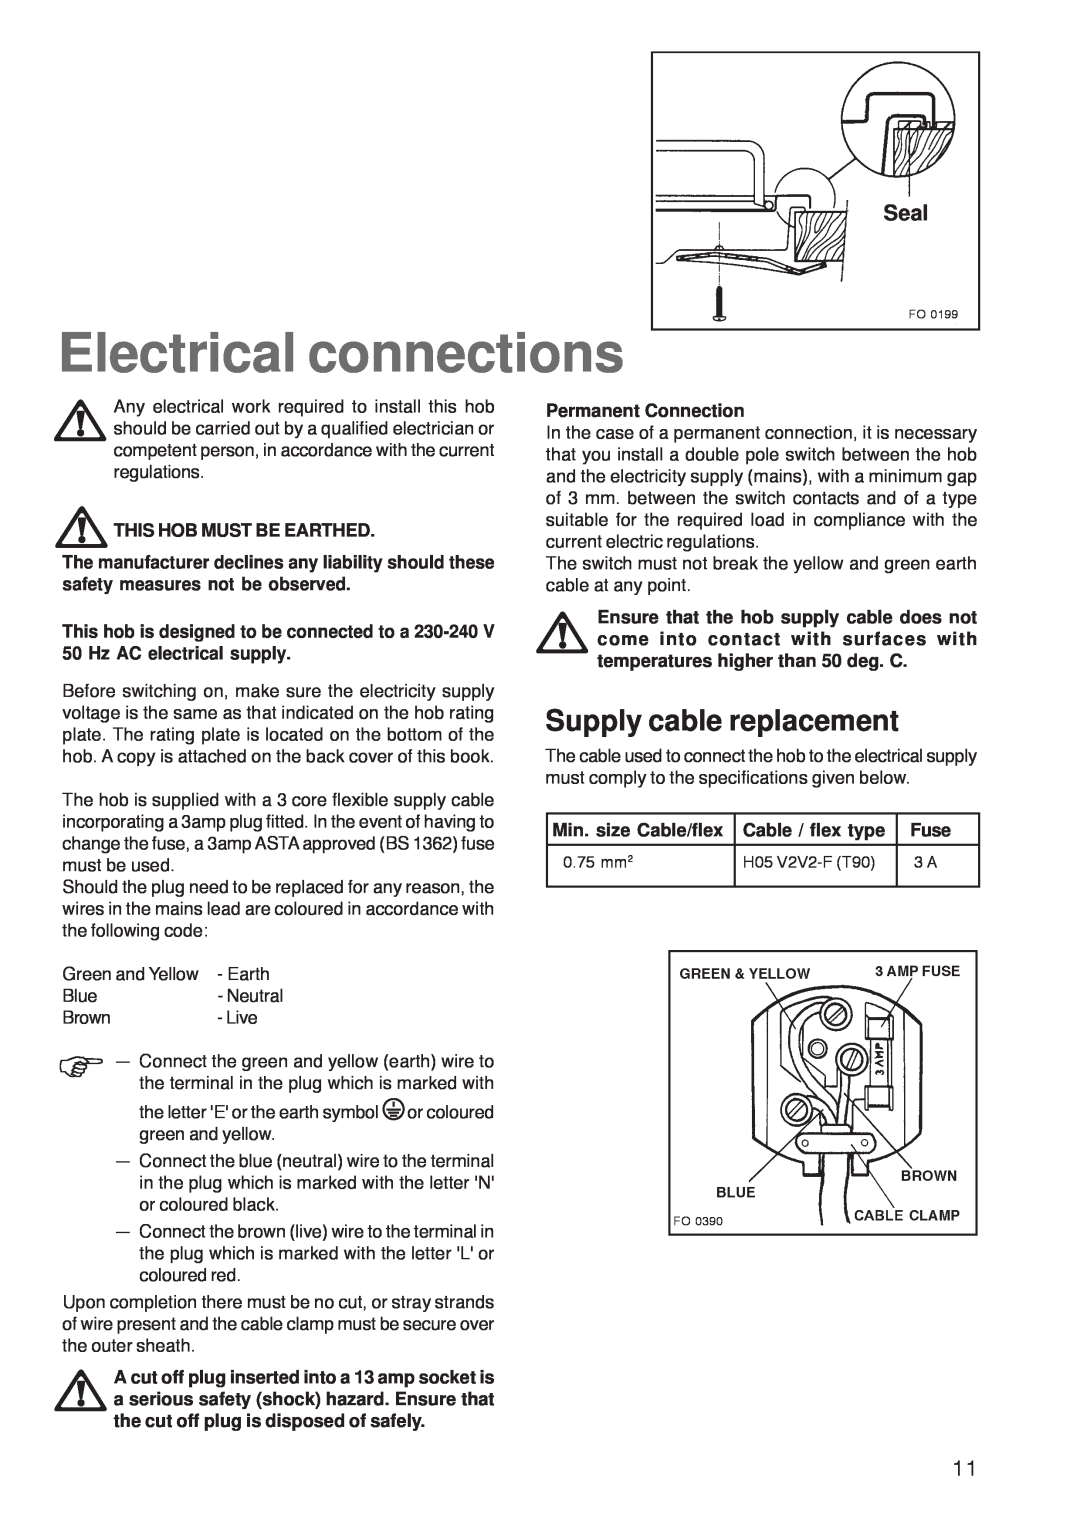 Zanussi ZGF 7820 Electrical connections, Supply cable replacement, aSeal, This Hob Must Be Earthed, Permanent Connection 